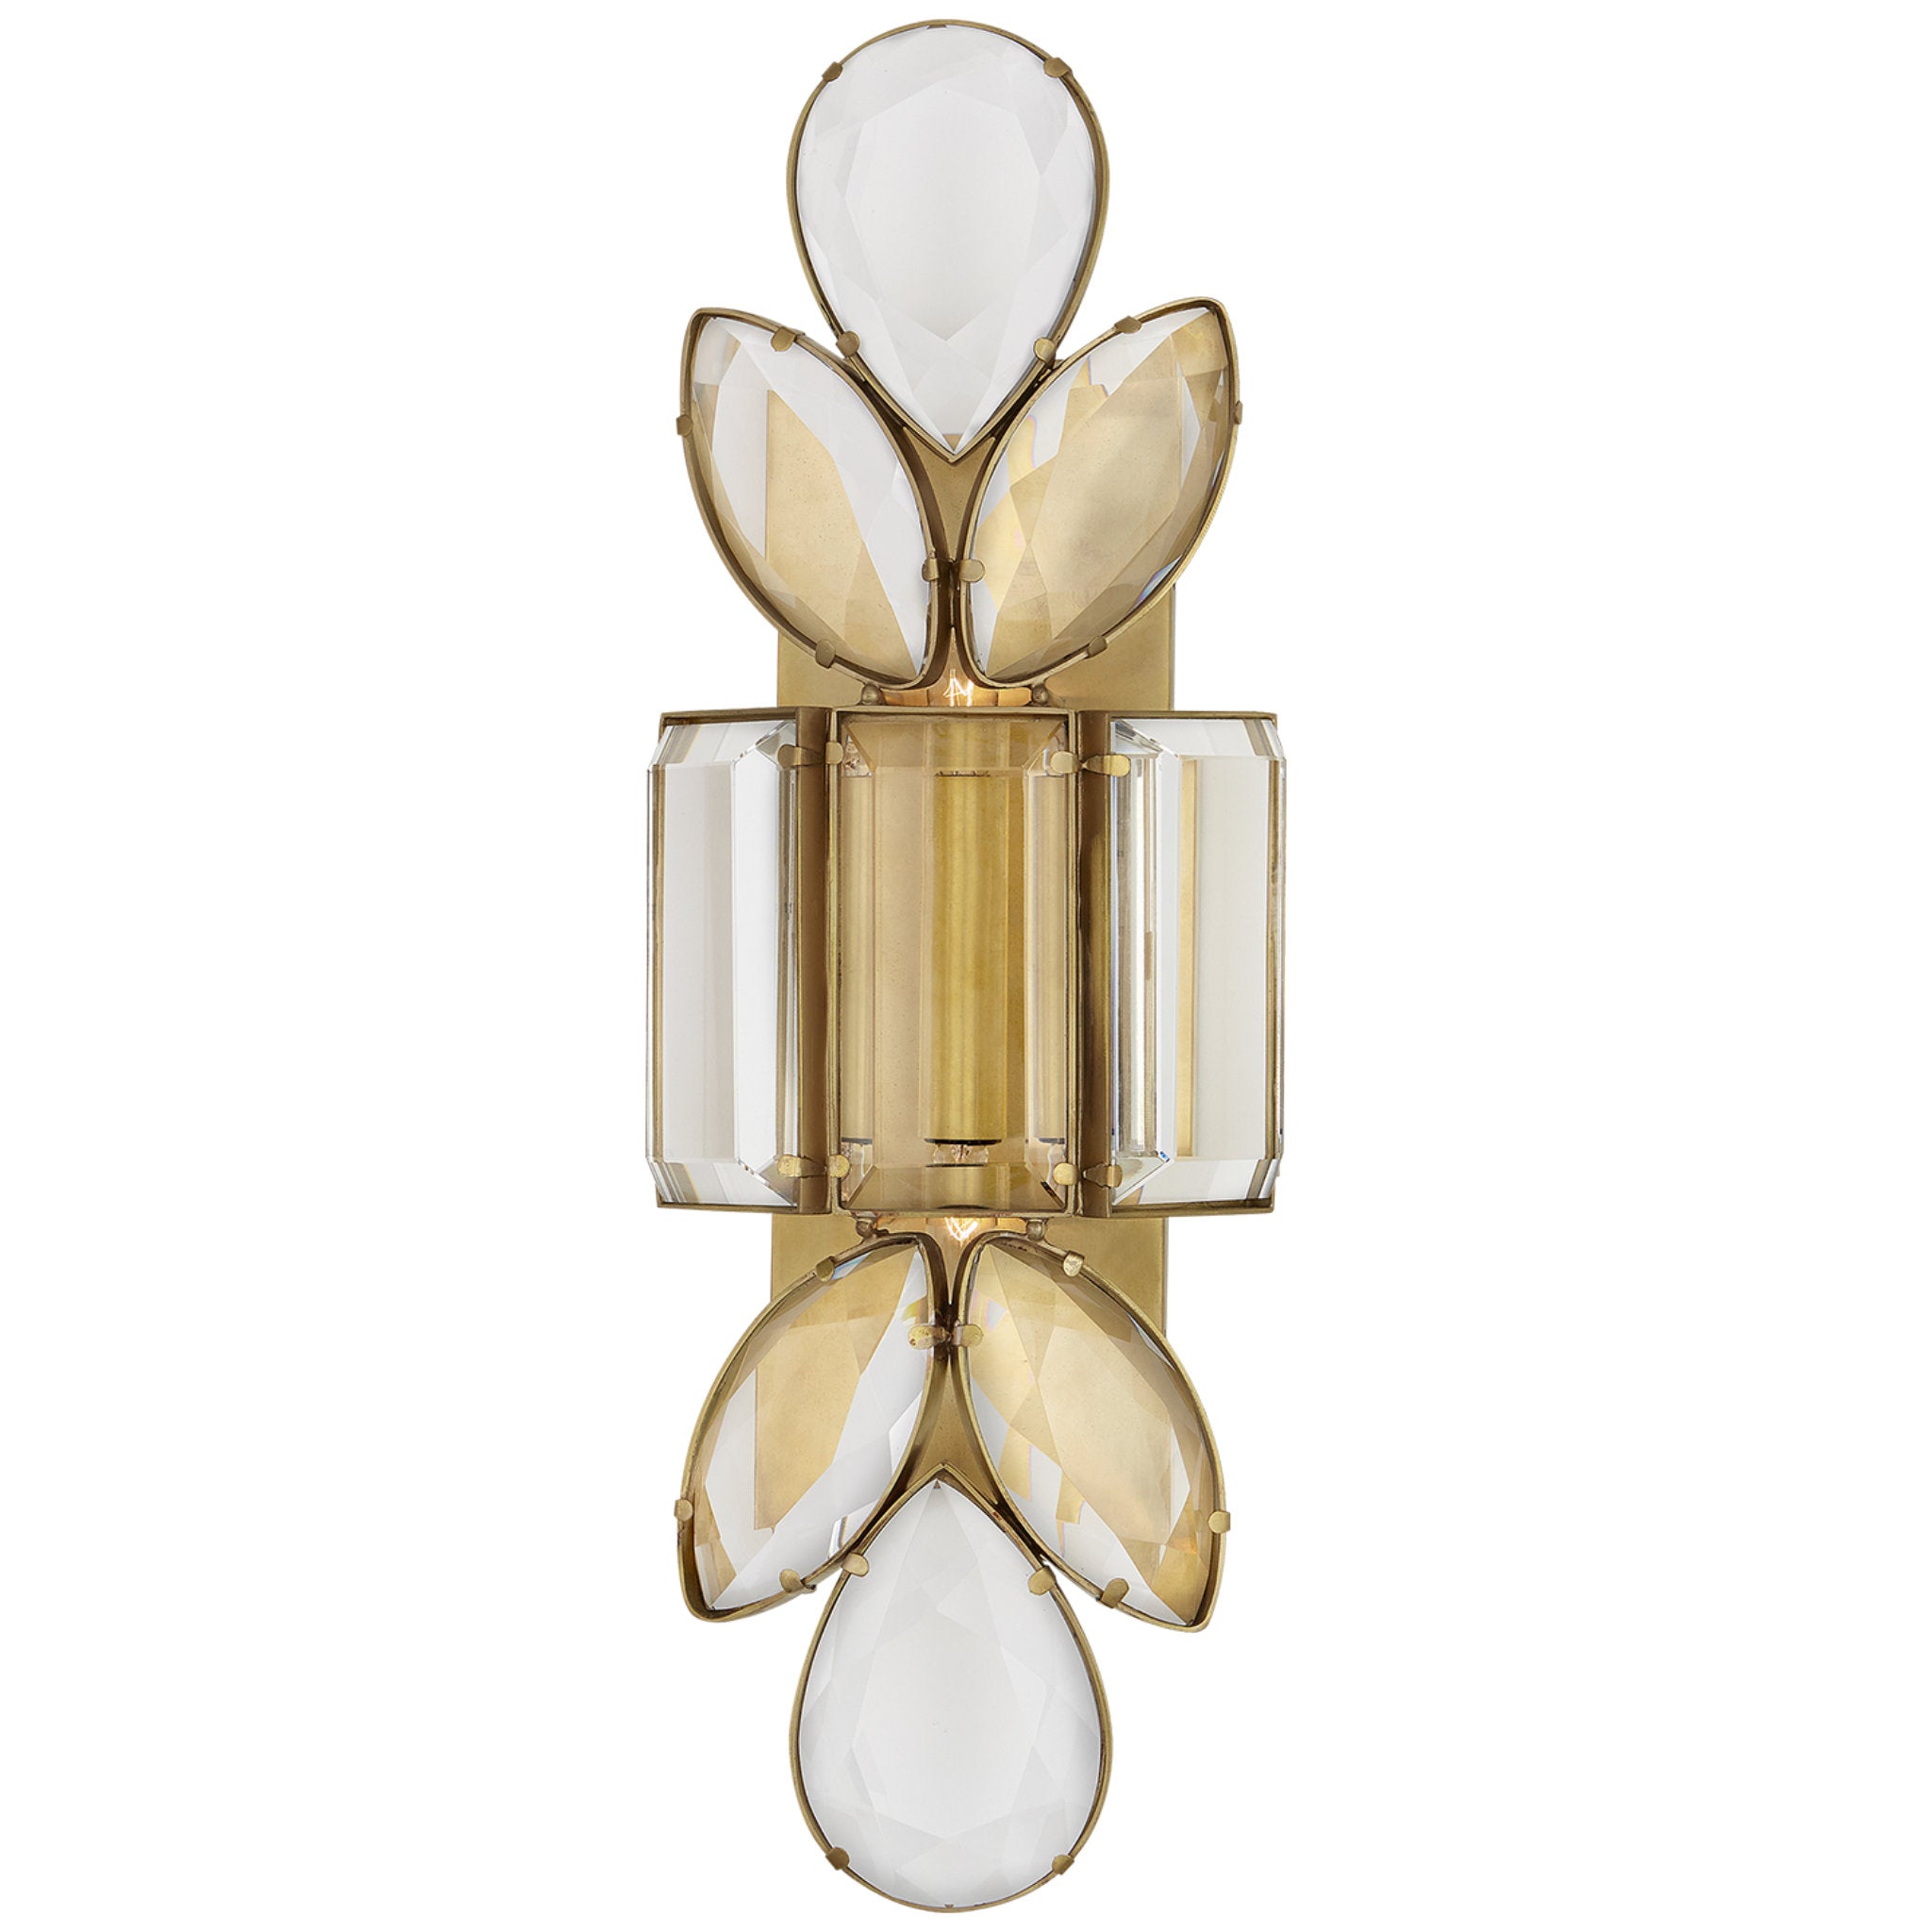 kate spade new york Lloyd Large Jeweled Sconce in Soft Brass with Clear Crystal